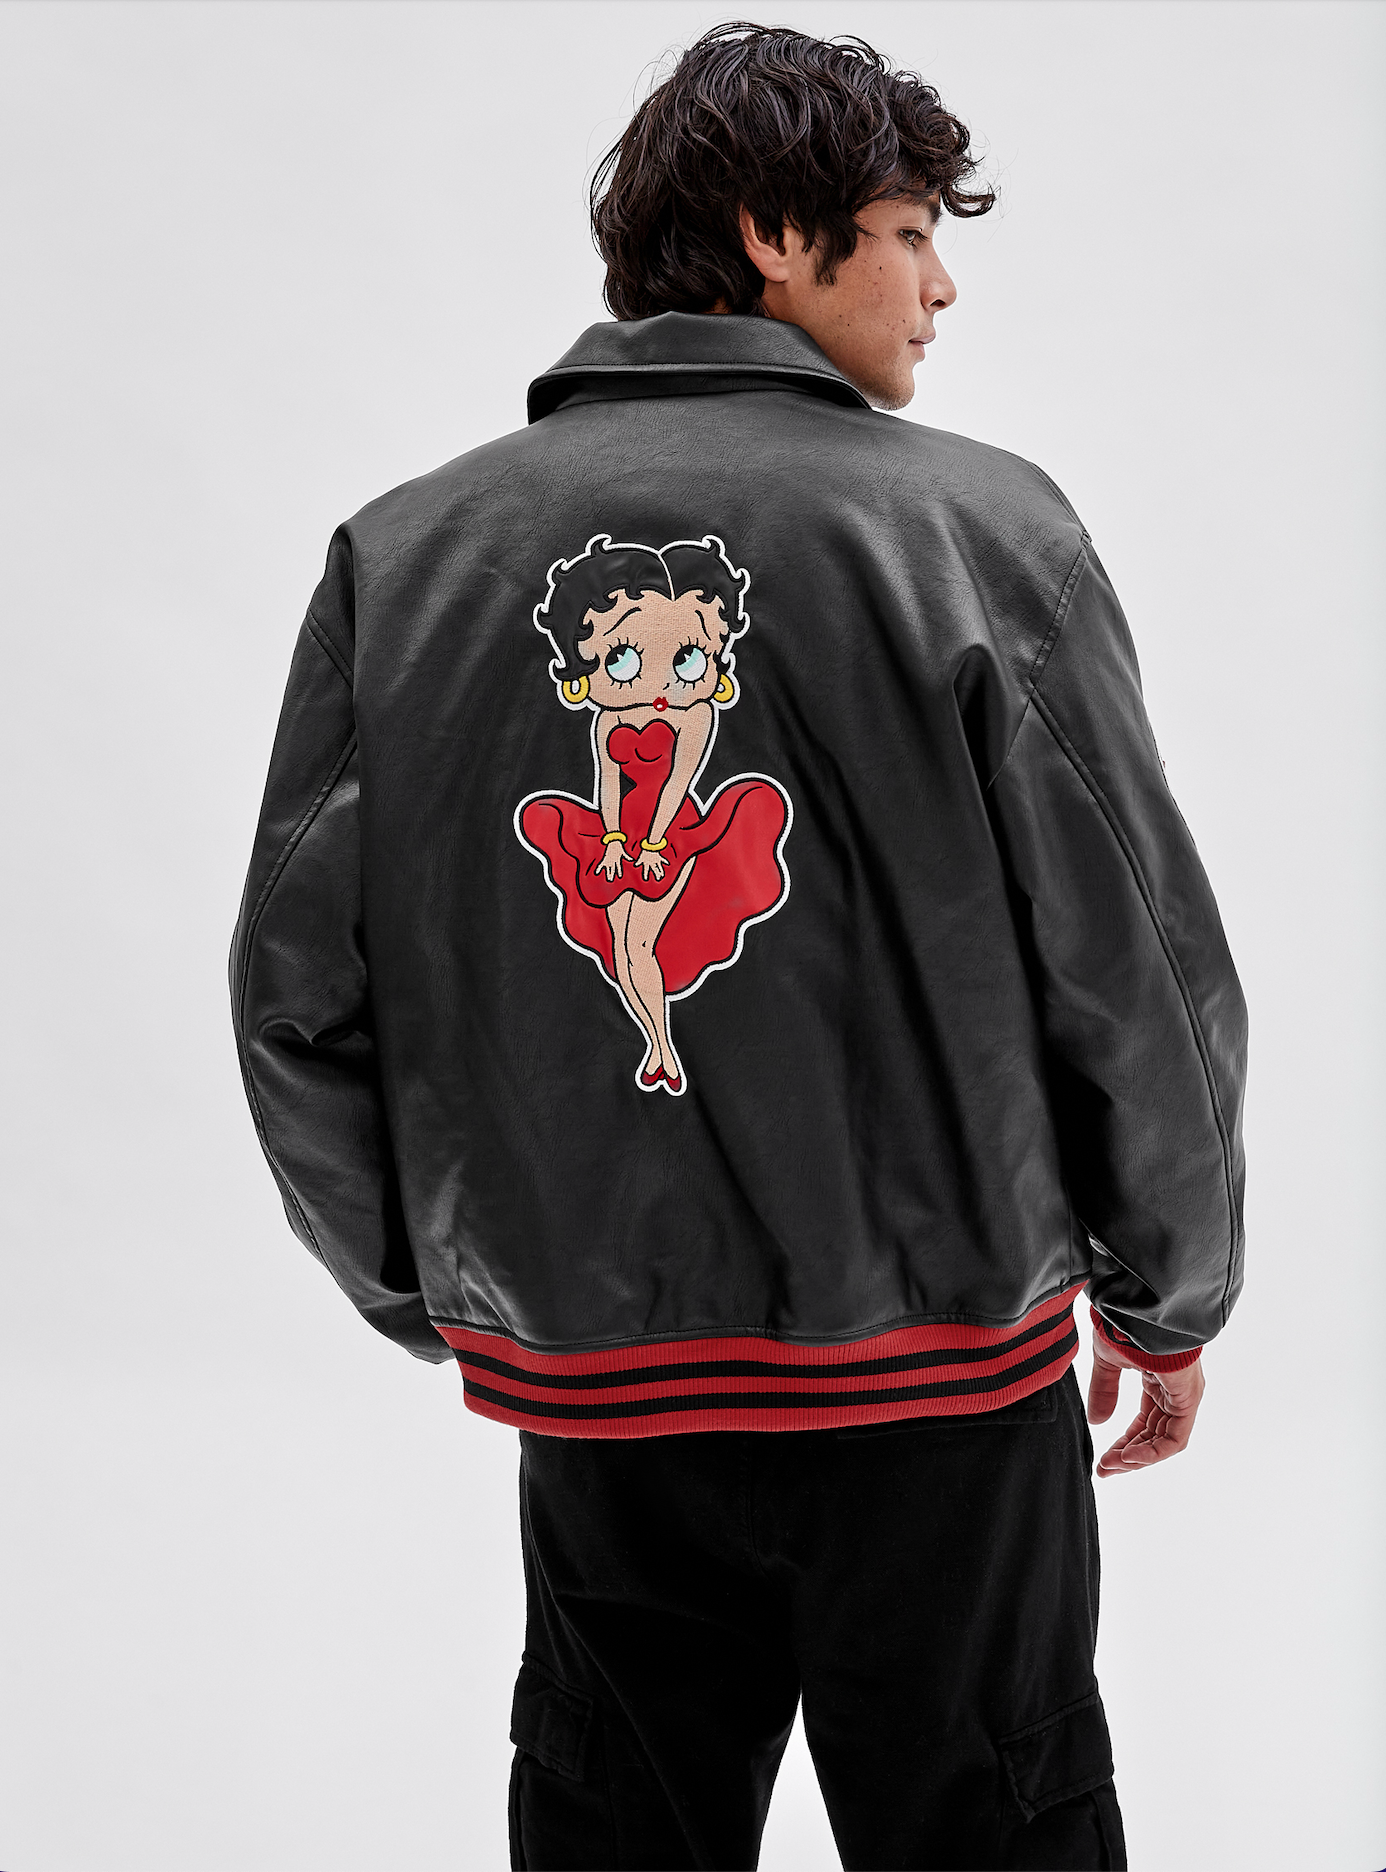 A button-up faux leather jacket with a patch of Betty Boop on one sleeve